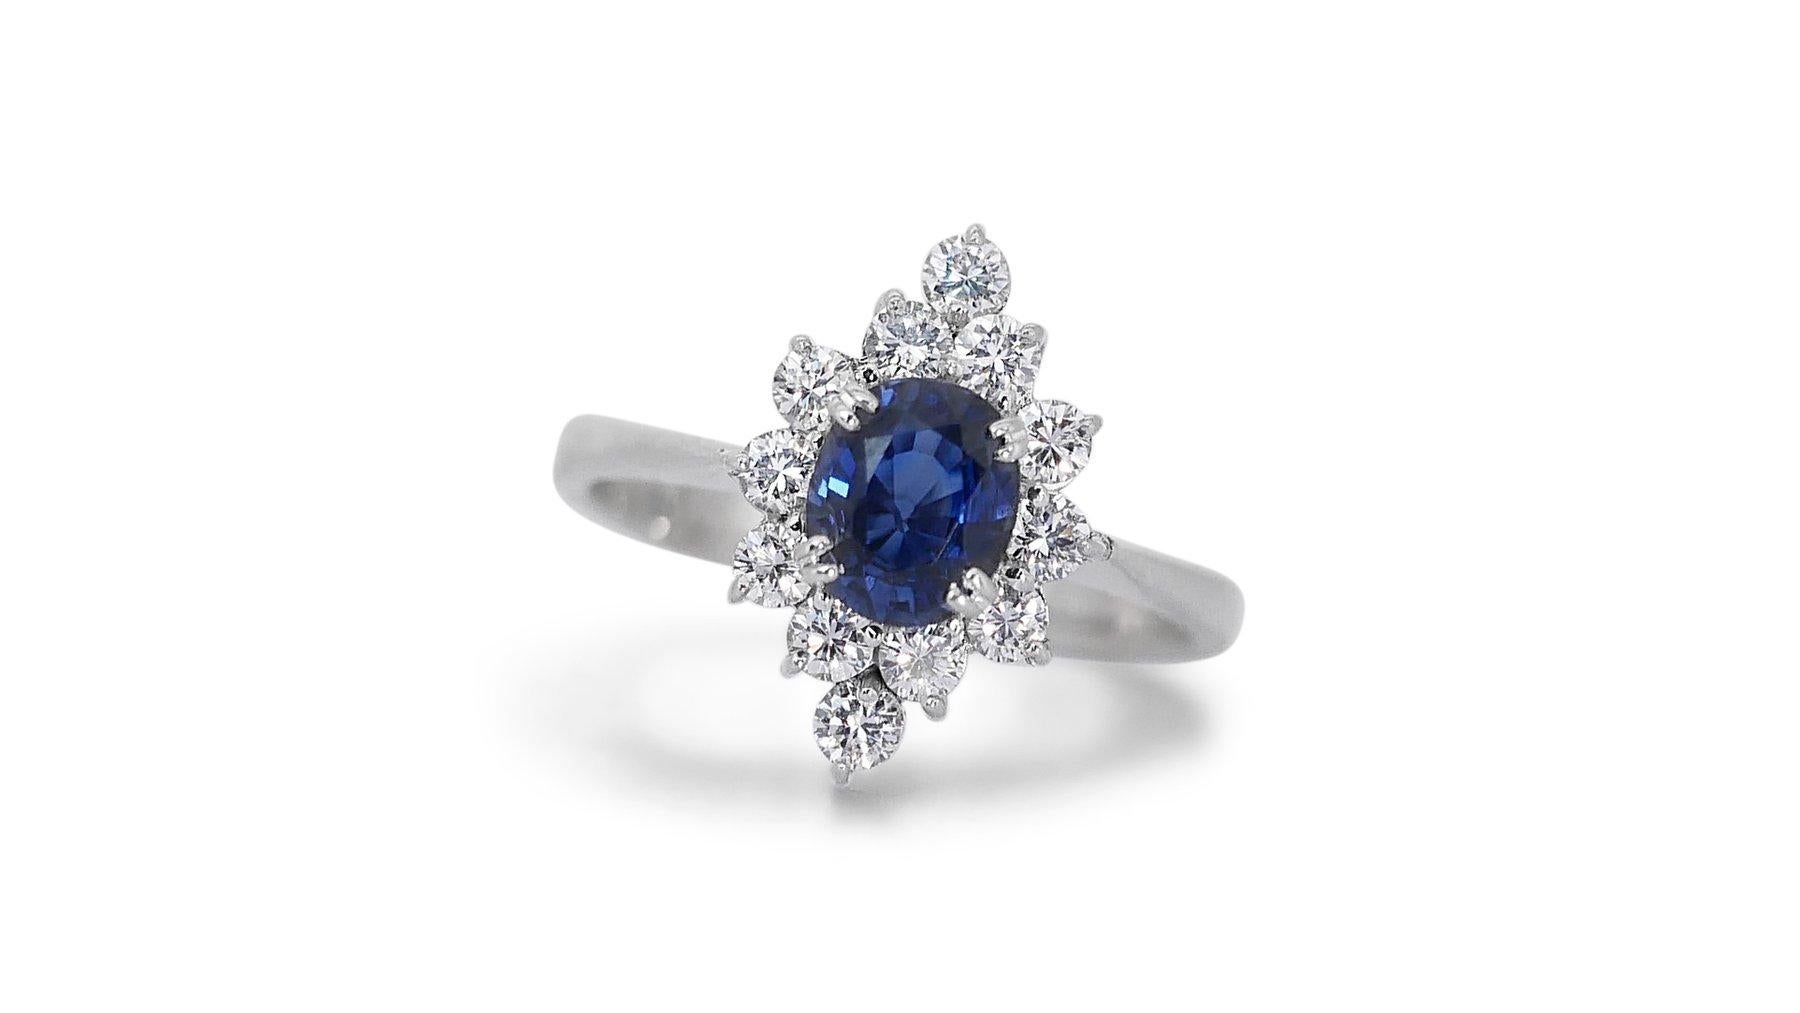 This stunning 1.37 carat oval natural sapphire ring in 18K white gold is the perfect way to show your loved one how much you care. The 0.89 carat oval natural sapphire is the centerpiece of the ring, and its dazzling brilliance is sure to turn